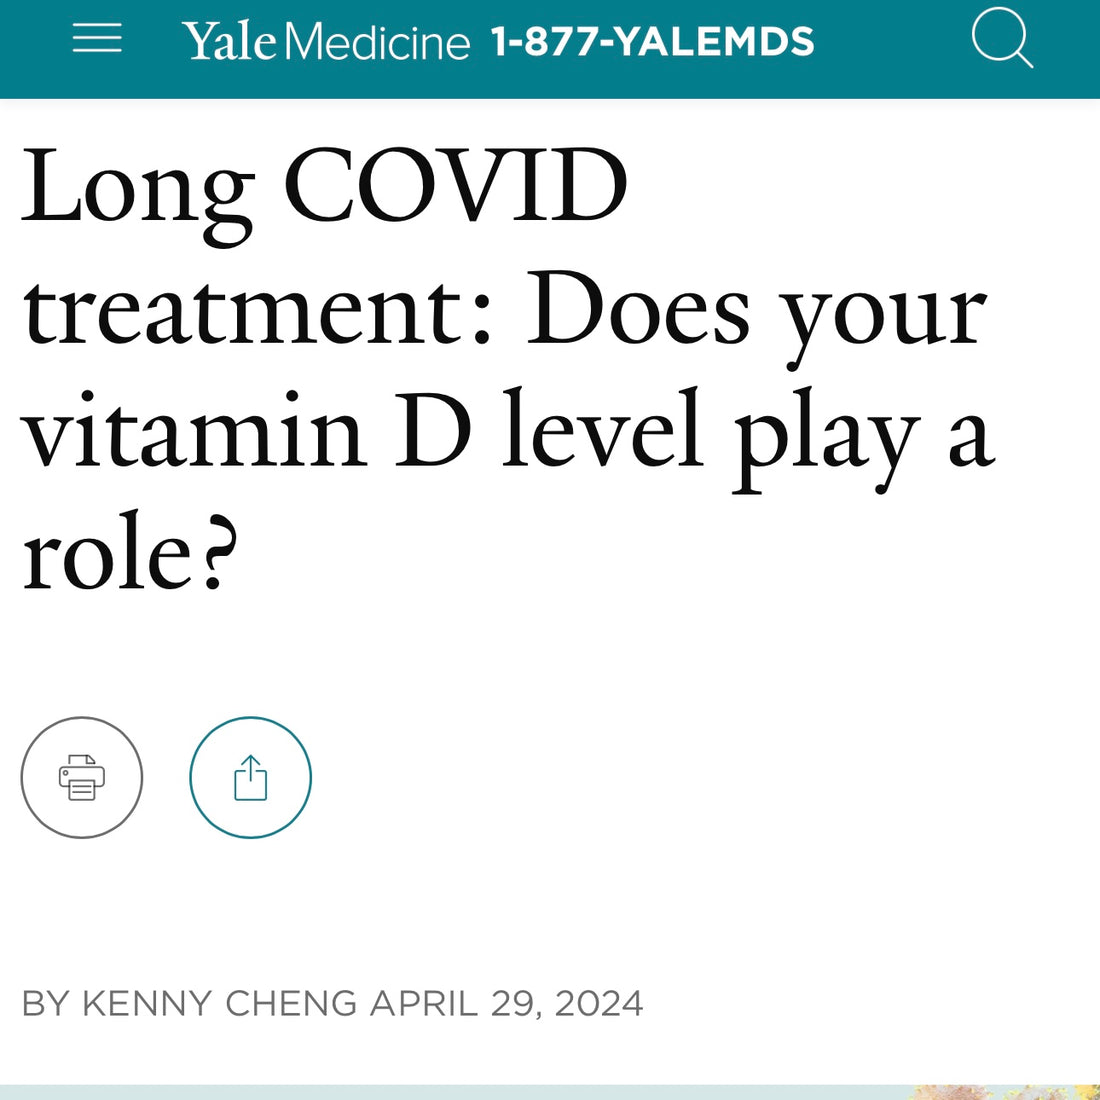 Shedding Light on Vitamin D: A Potential Player in COVID-19 and Long COVID